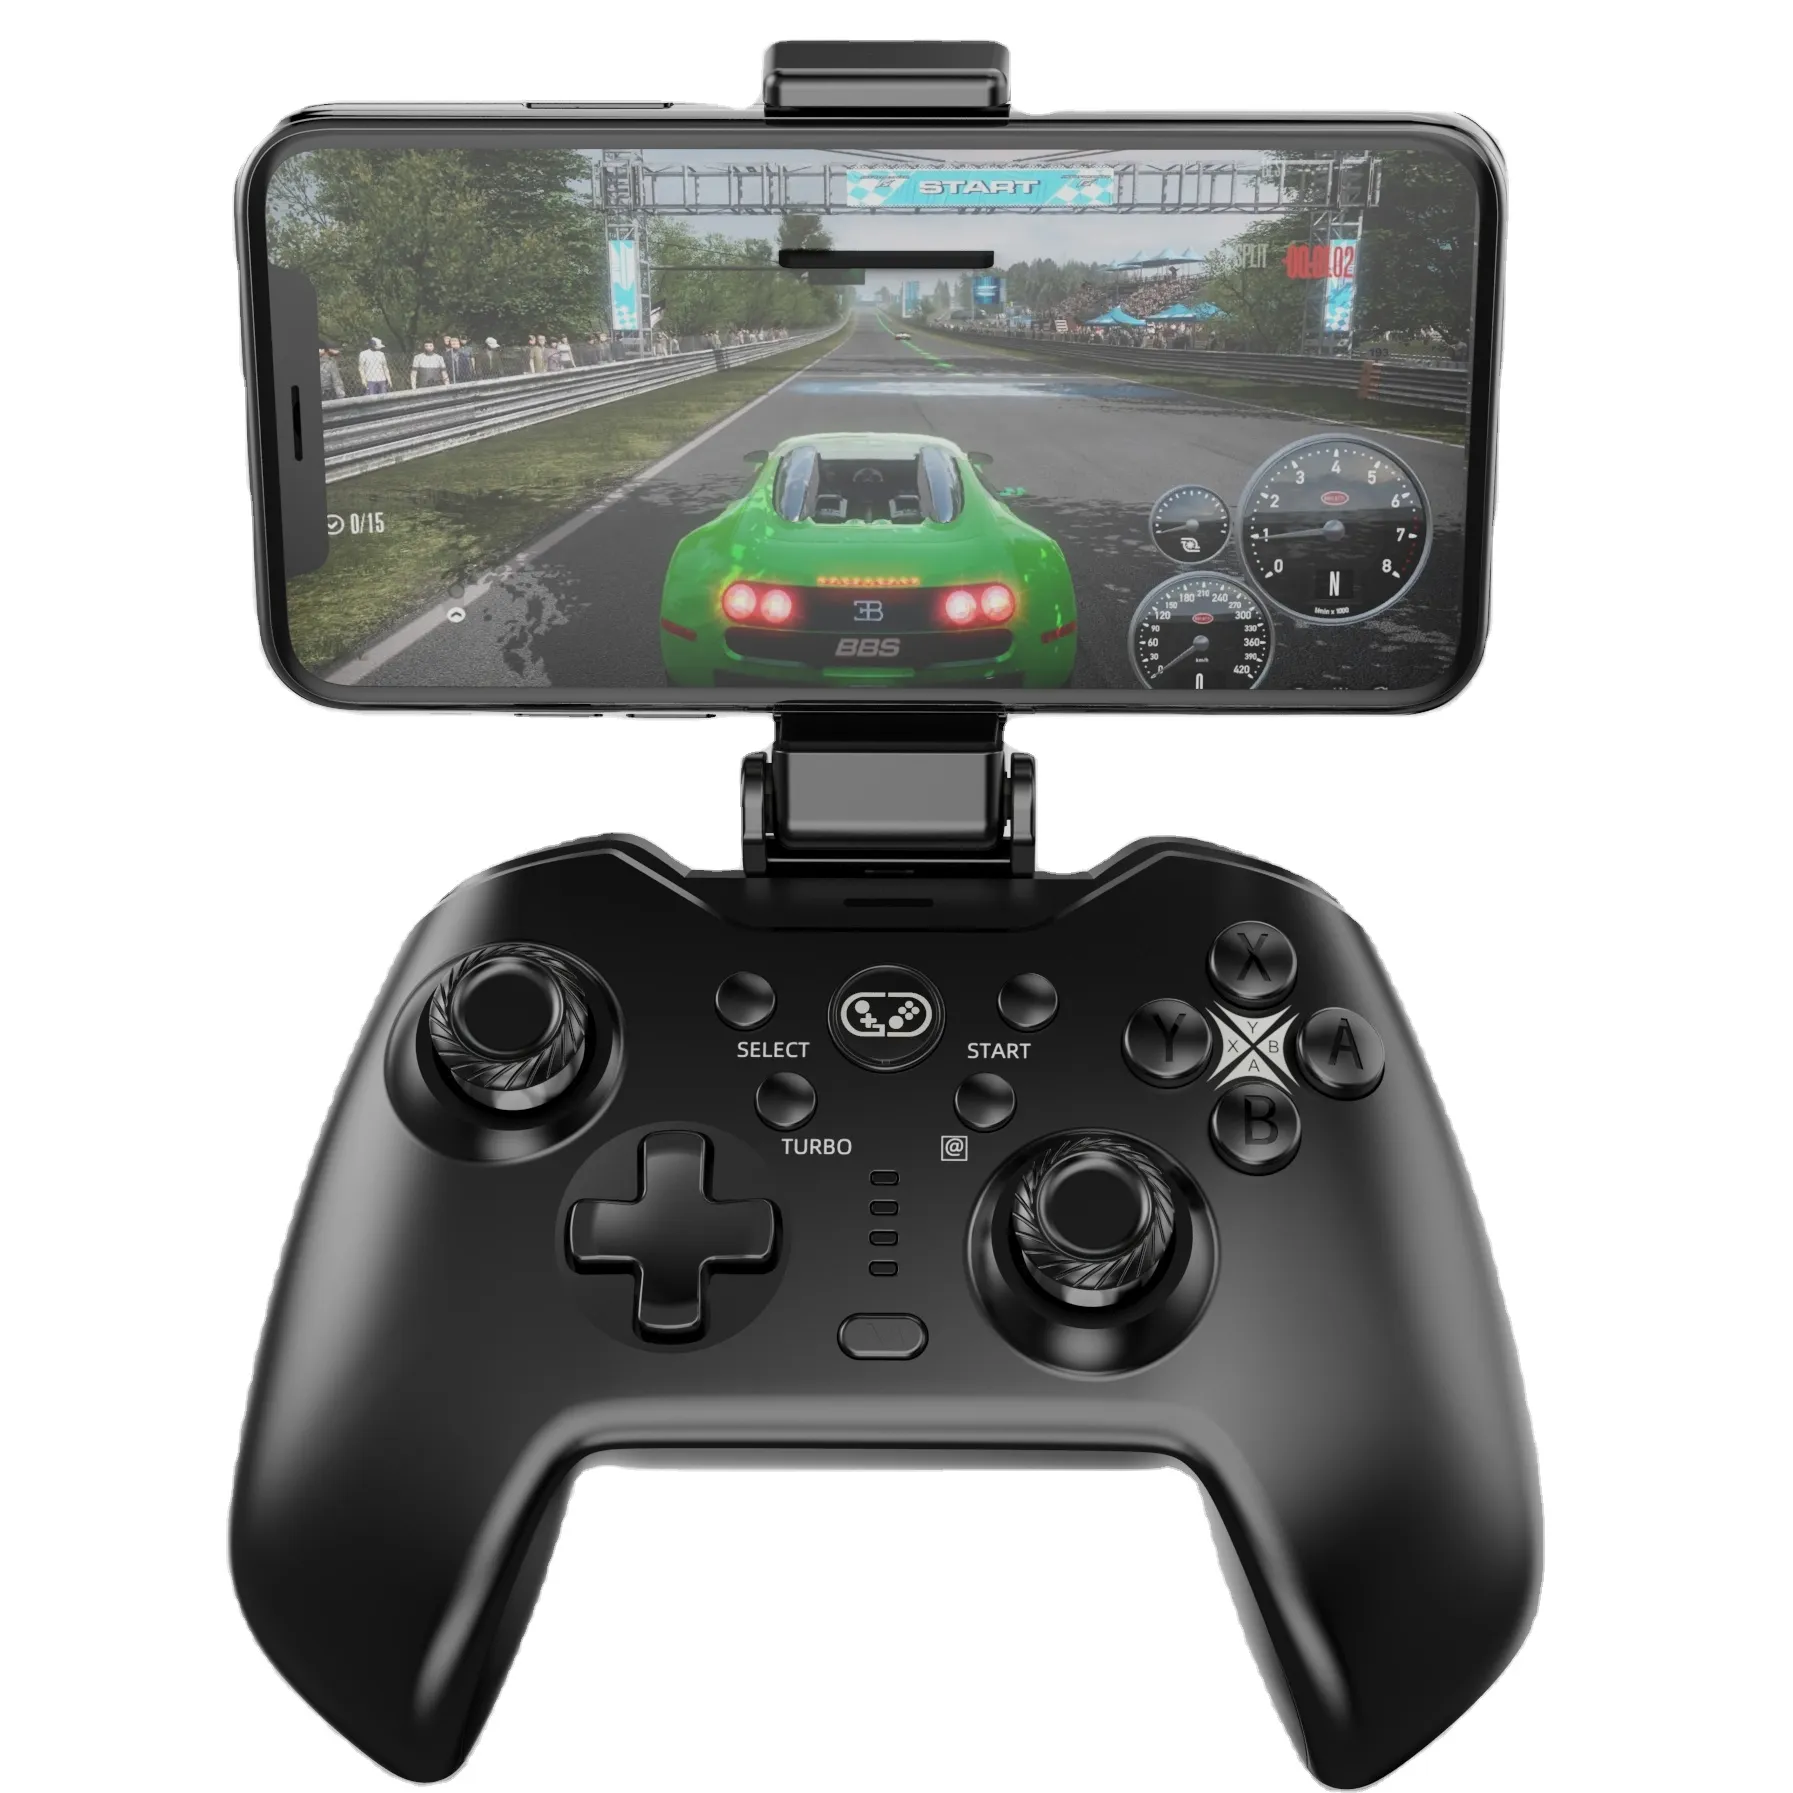 Controle de vídeo game nintendo switch, gamepad para nintendo switch/android/ios/pc/ps3/ps4/xbox360